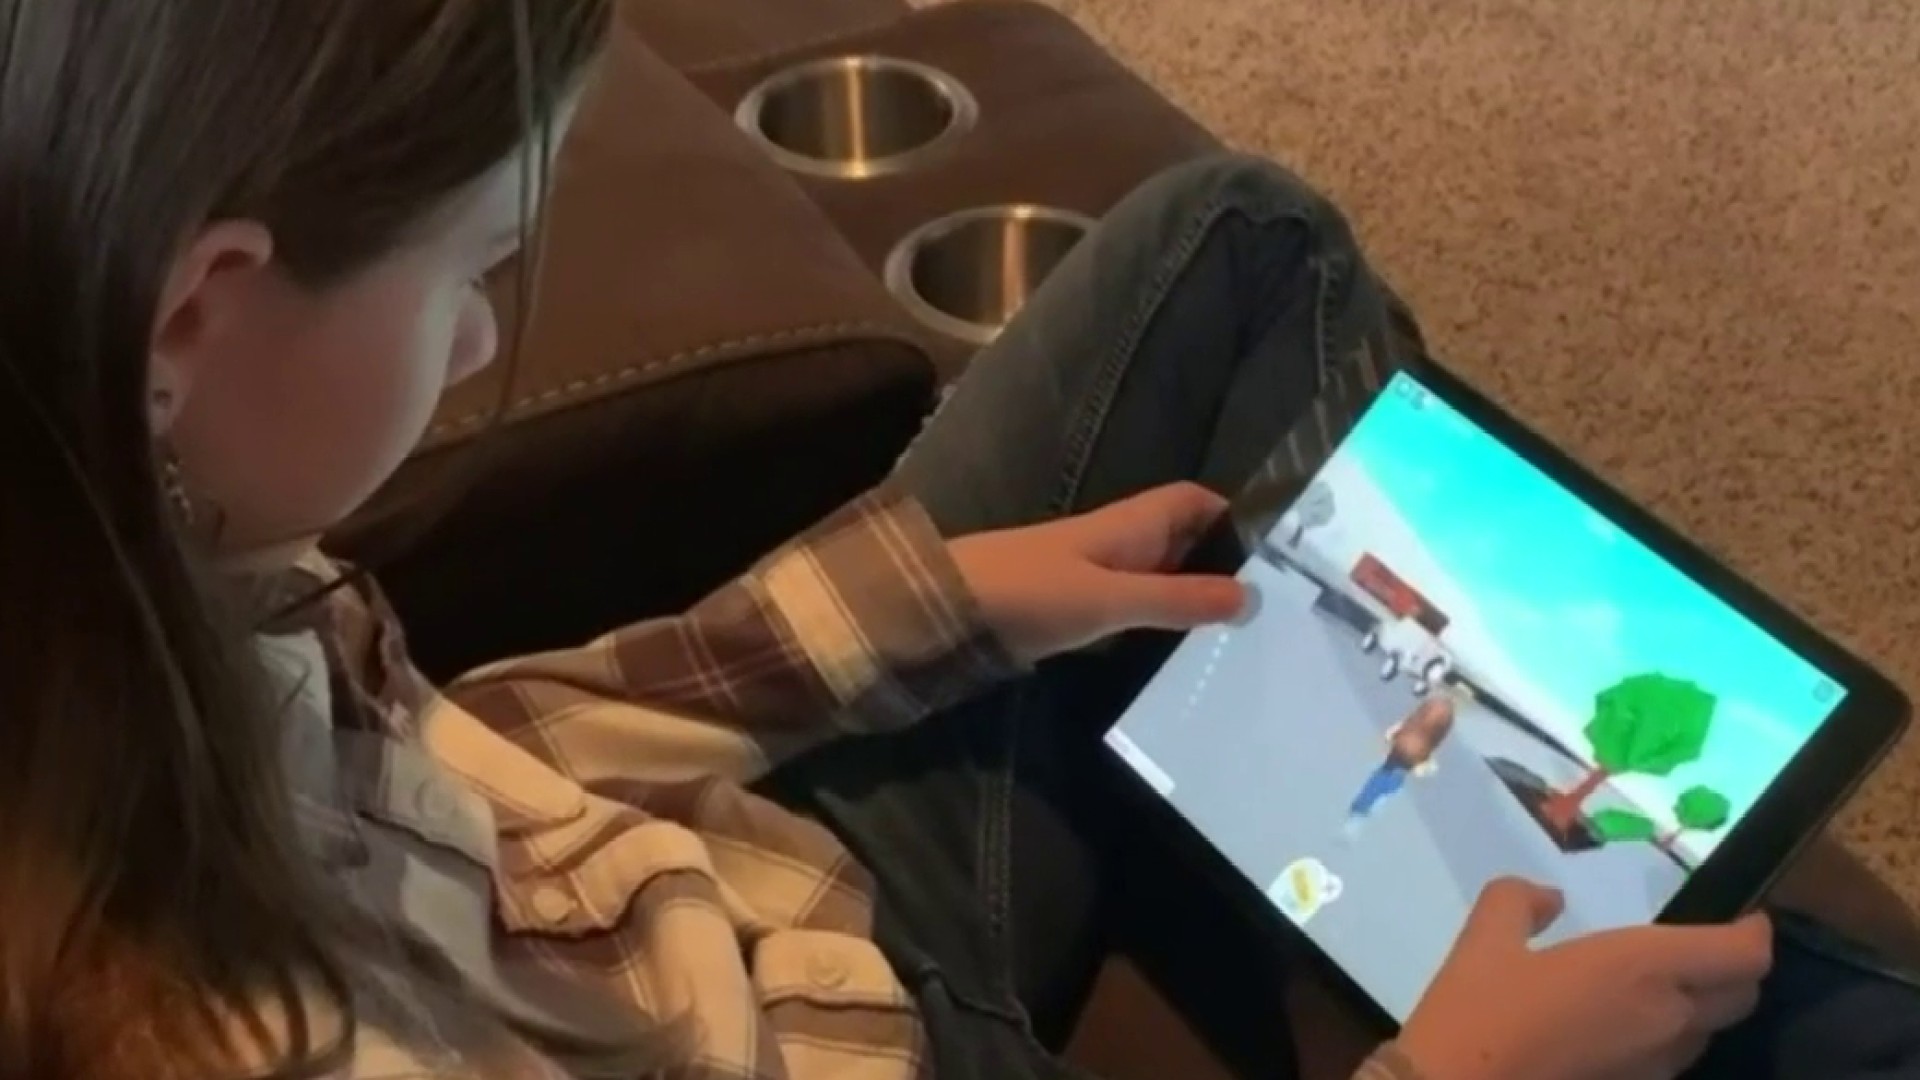 Did You Know Kids Playing Roblox Are Using Their Robux to Play in